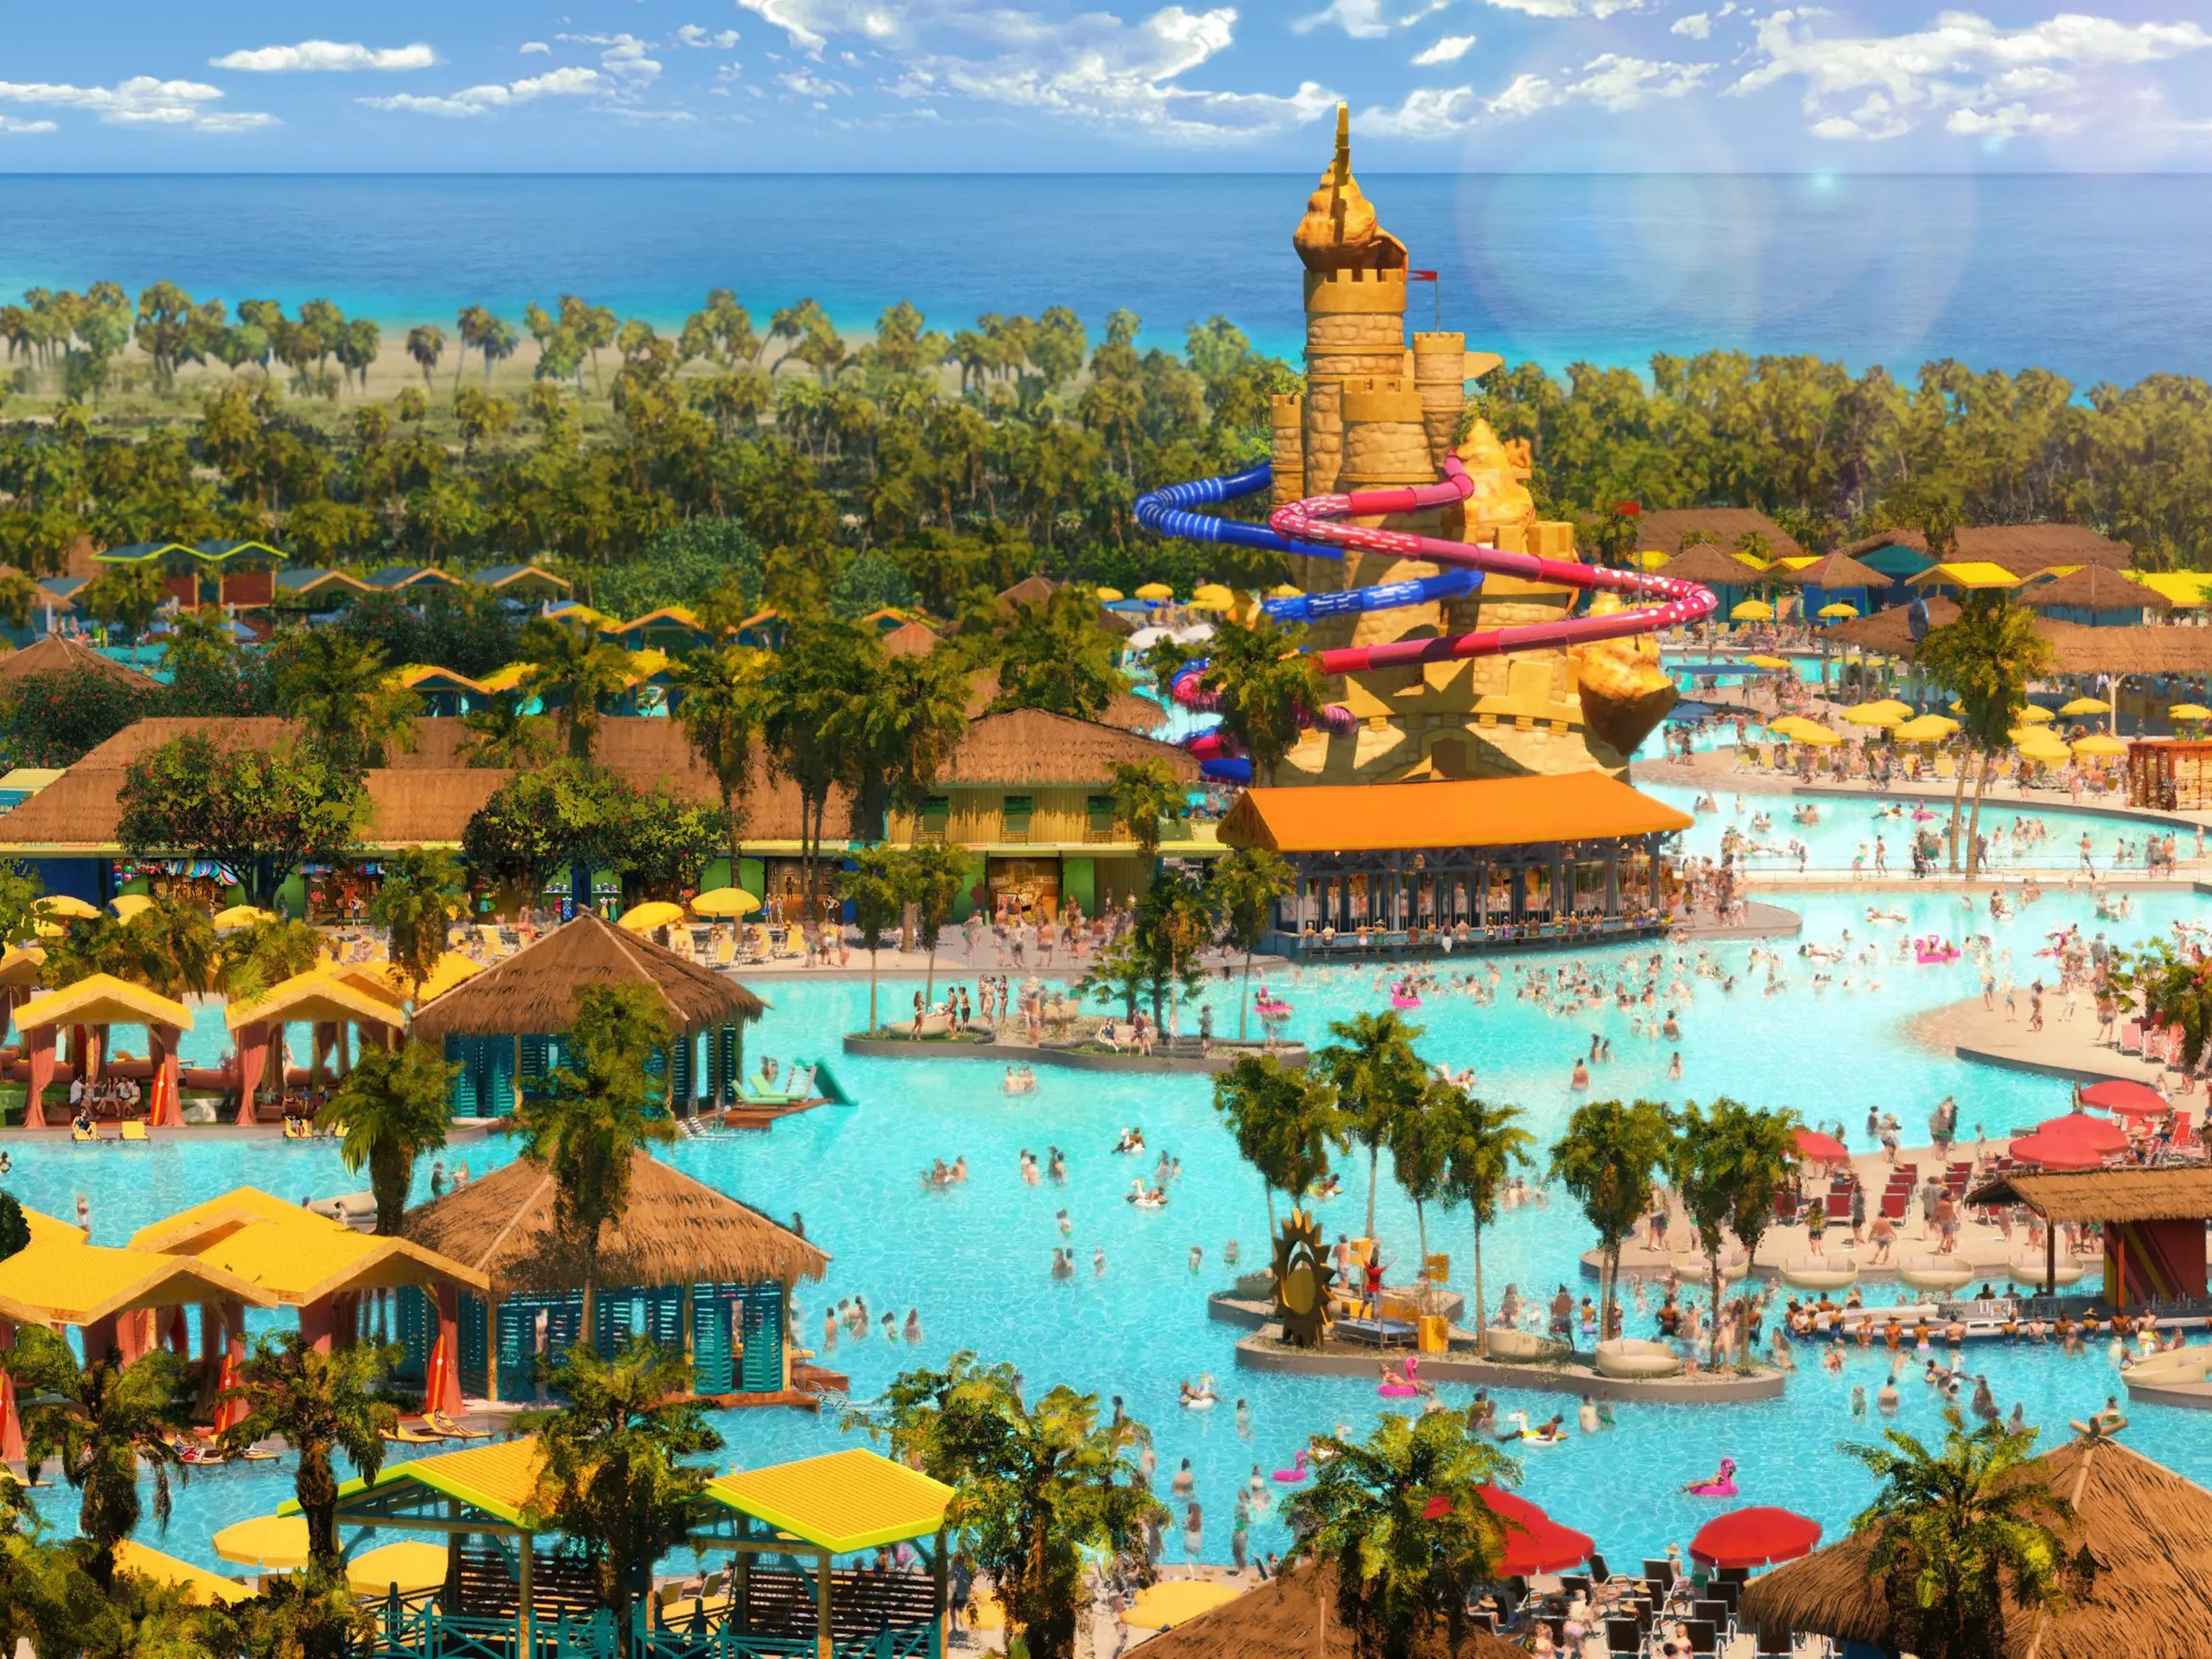 rendering of Celebration Key with cabanas, pools, buildings